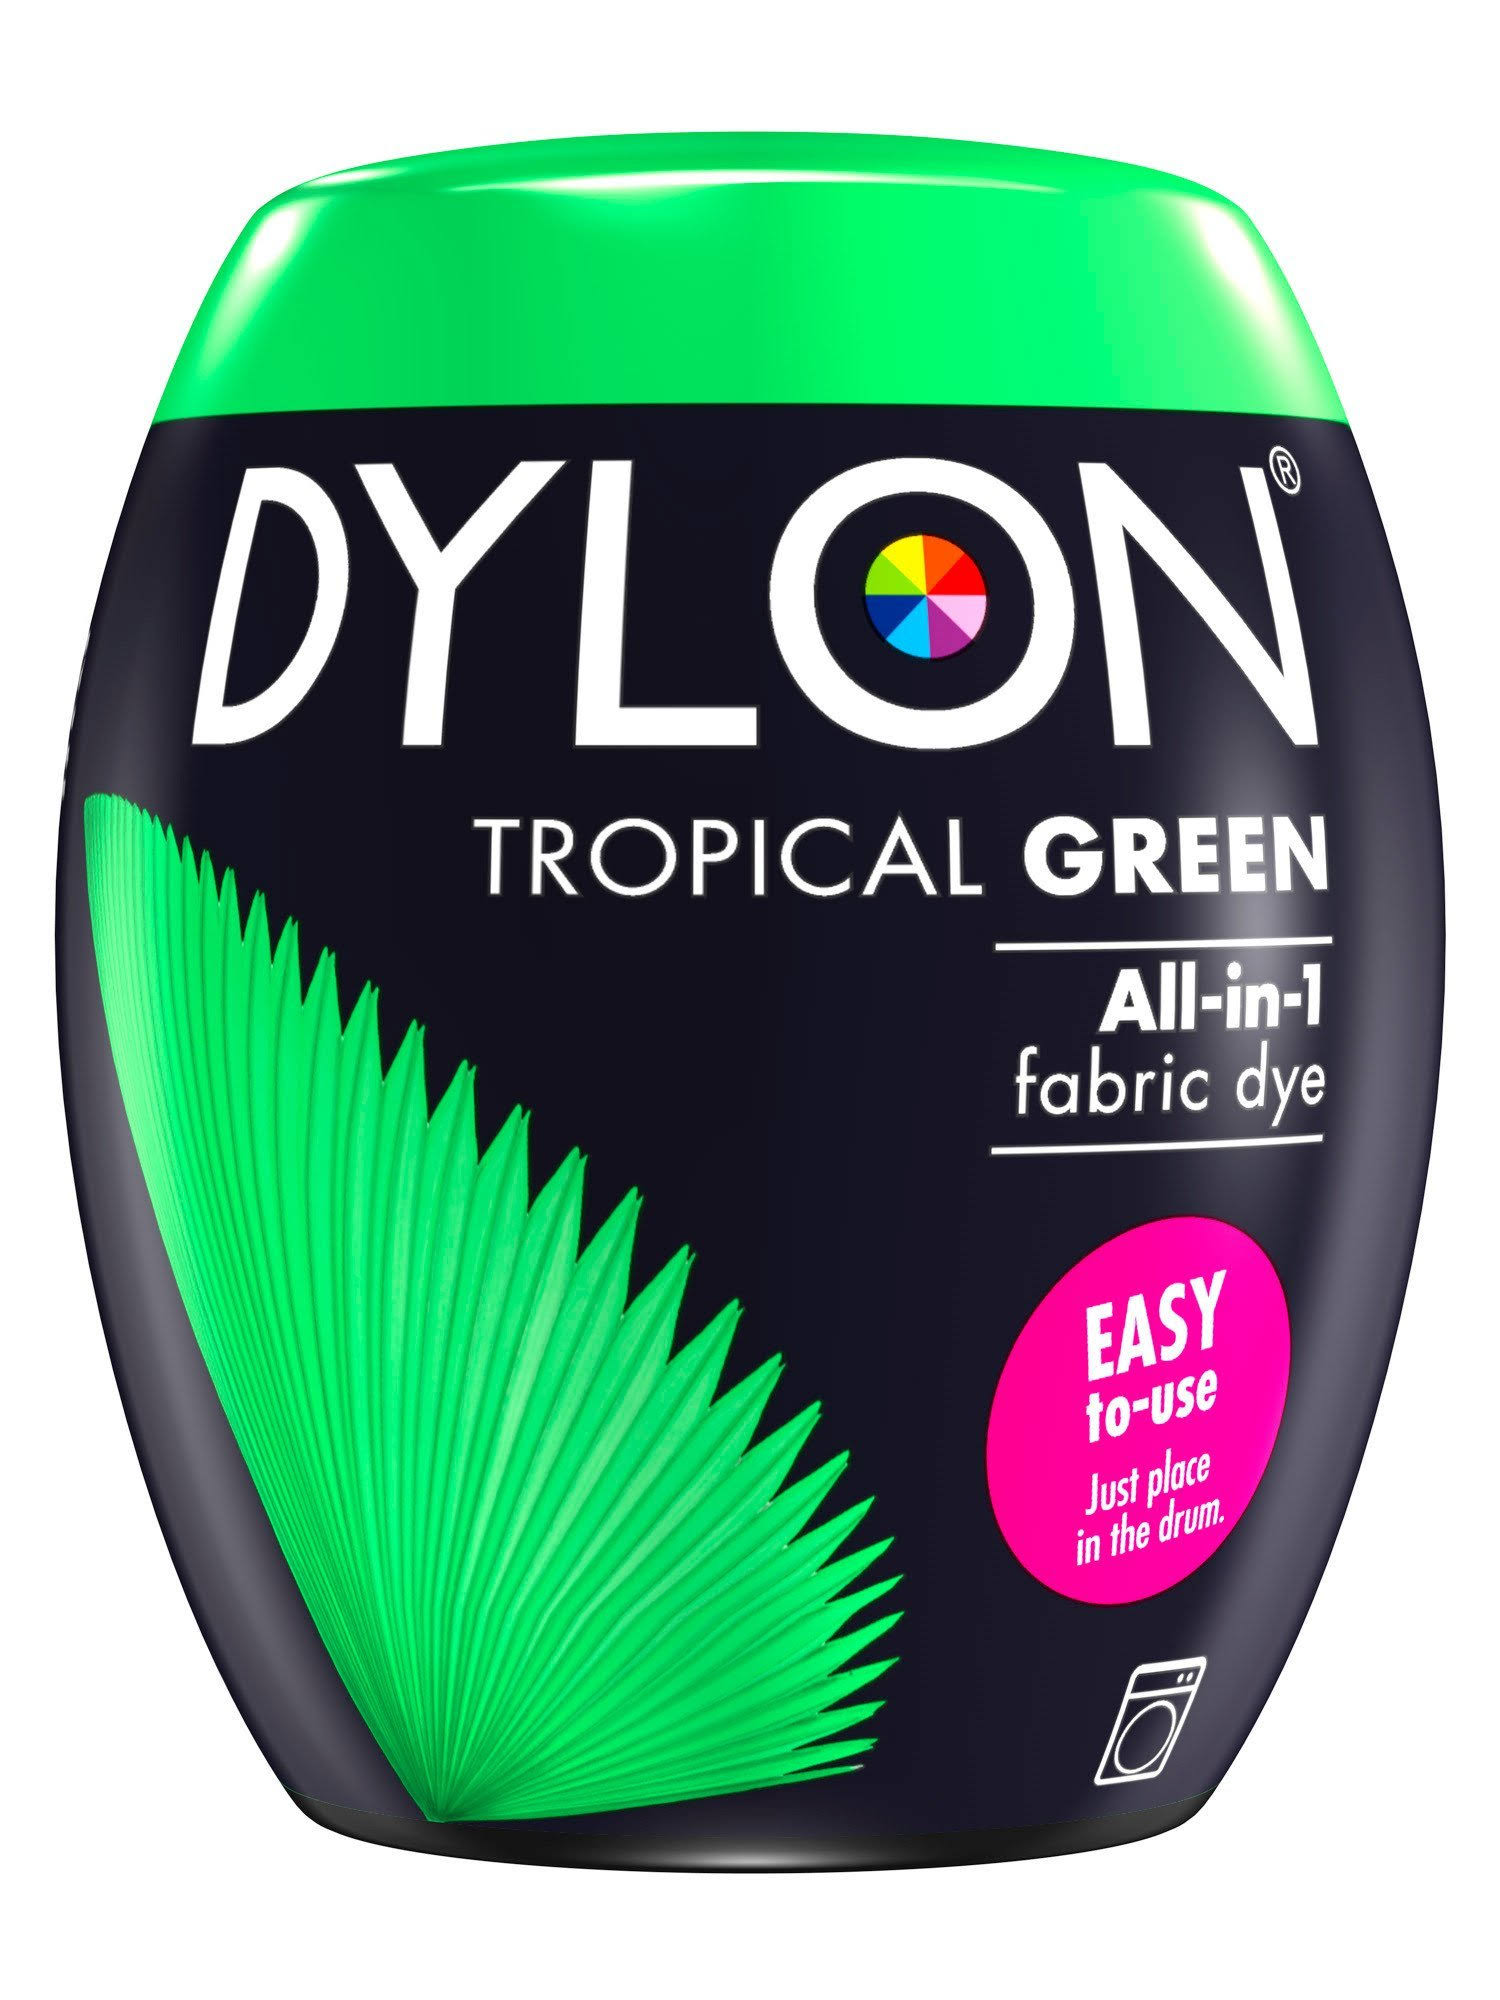 Dylon Machine Dye Pod Fabric Clothes All in One - Tropical Green